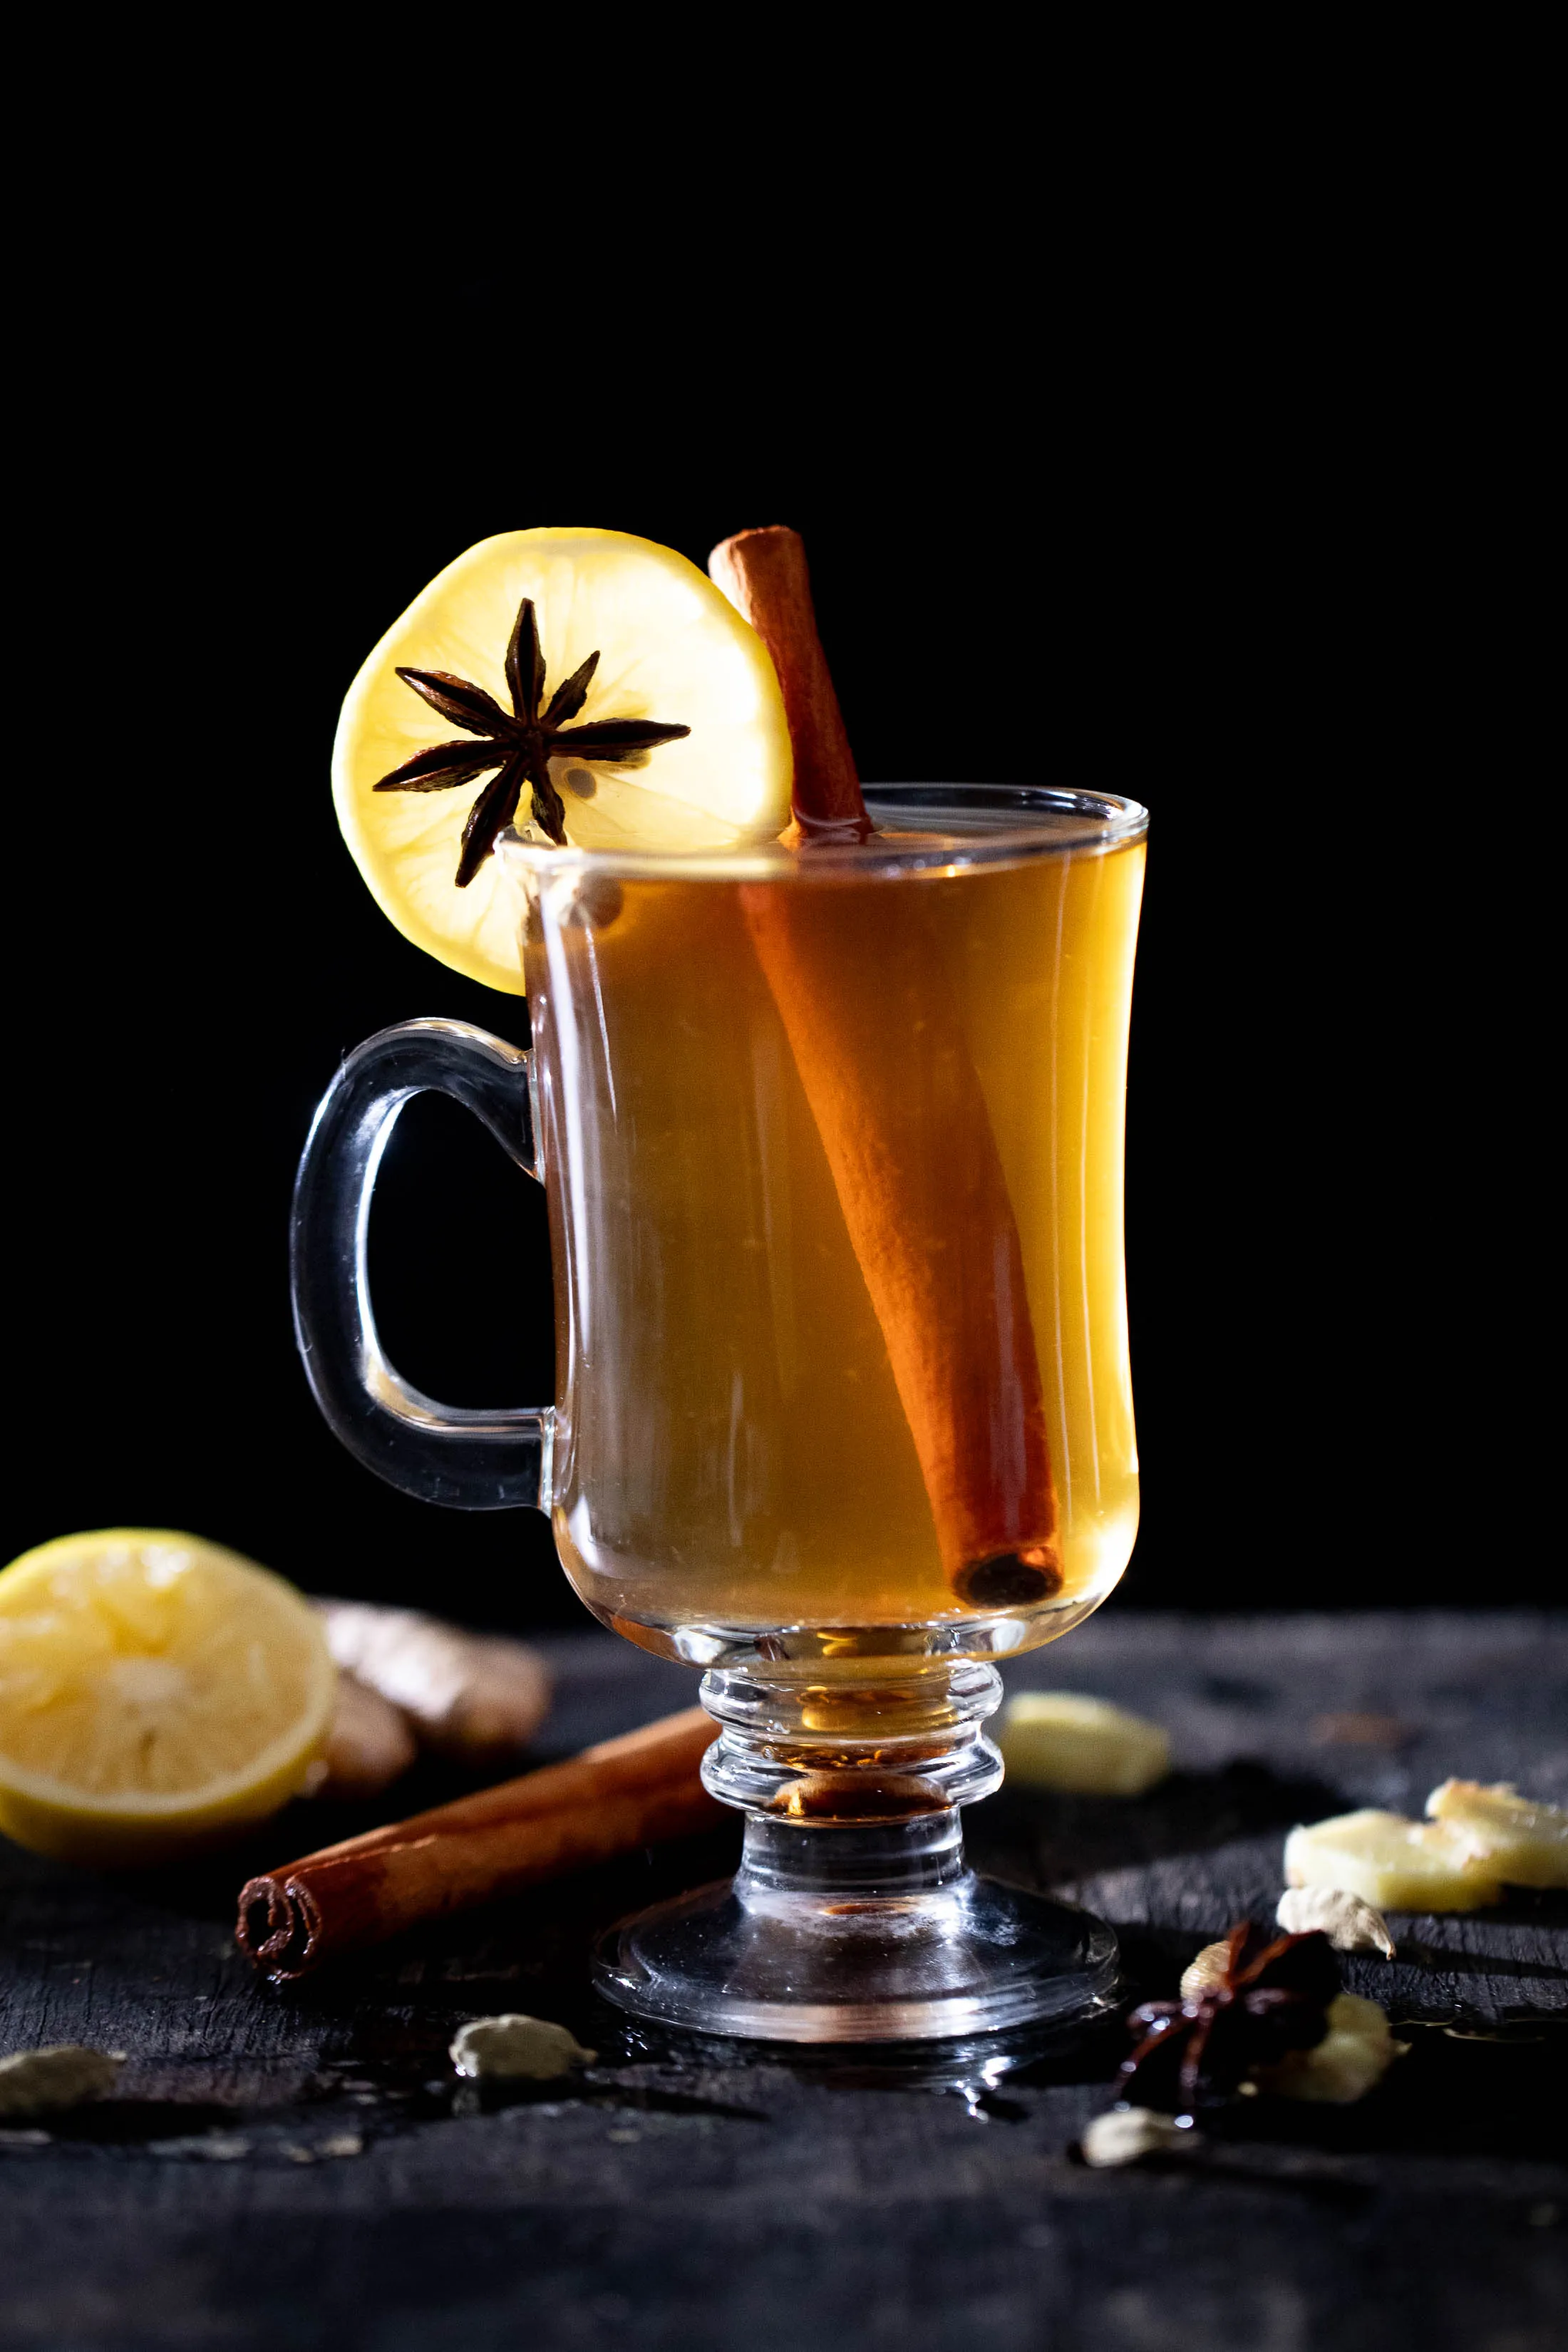 https://indiaphile.info/wp-content/uploads/2023/11/stp-hot-toddy-6424.jpg